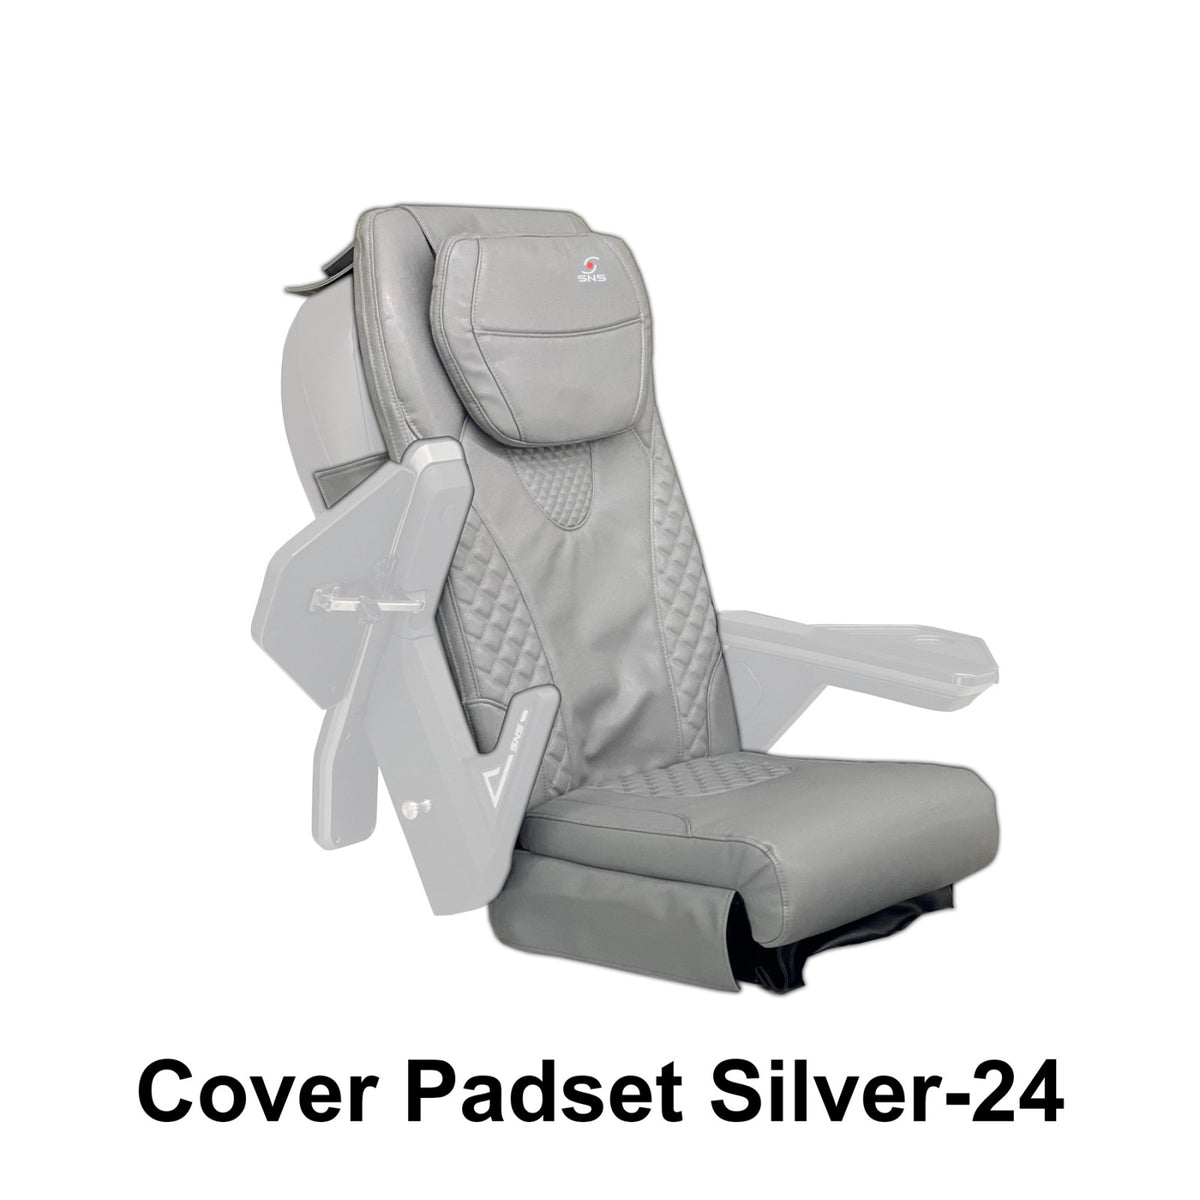 Padset 24 Silver Velcro